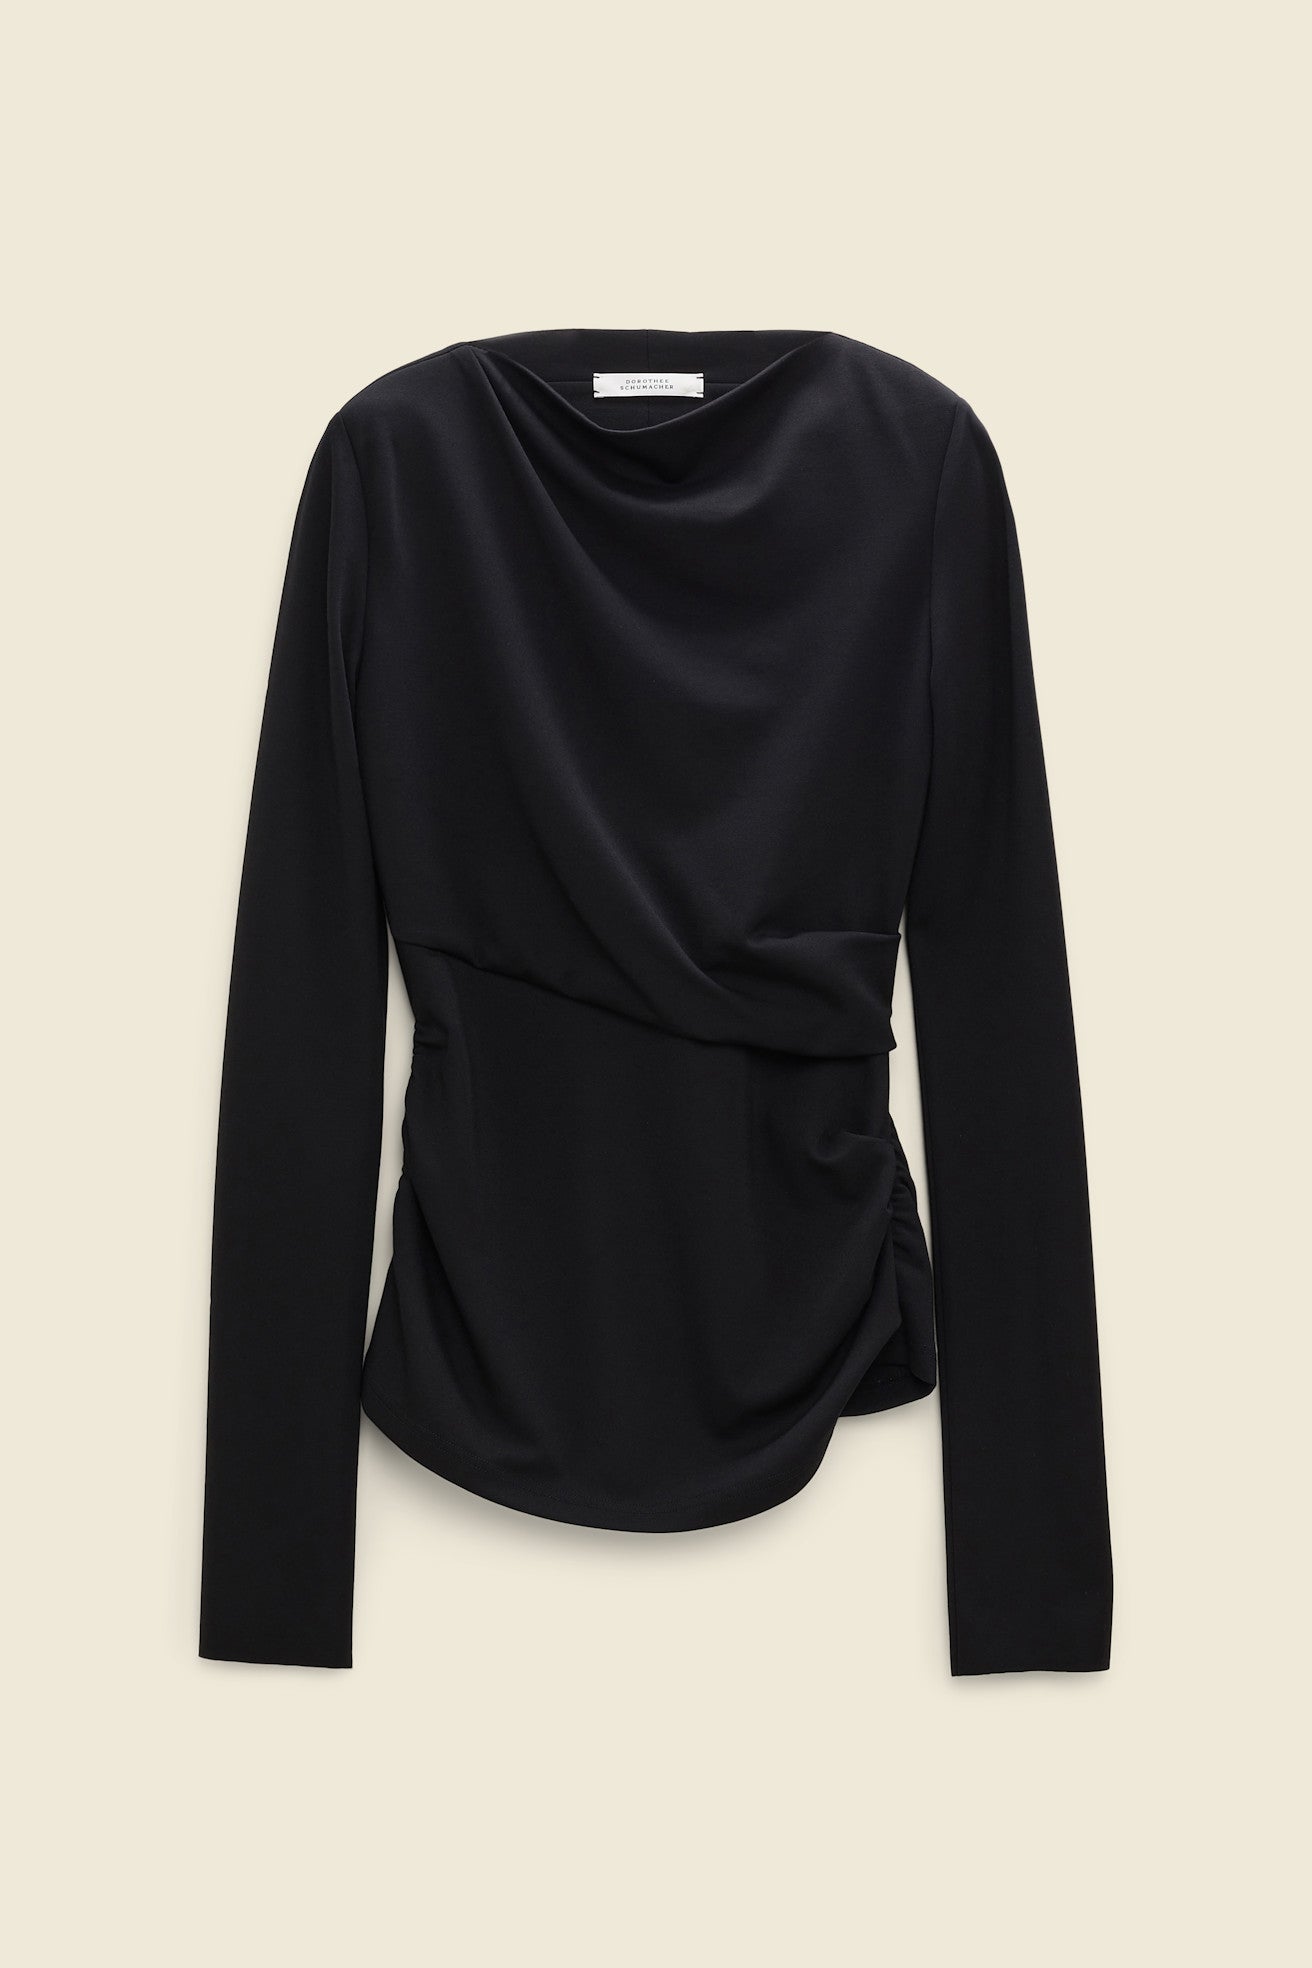 Emotional Essence blouse top by Dorothee Schumacher